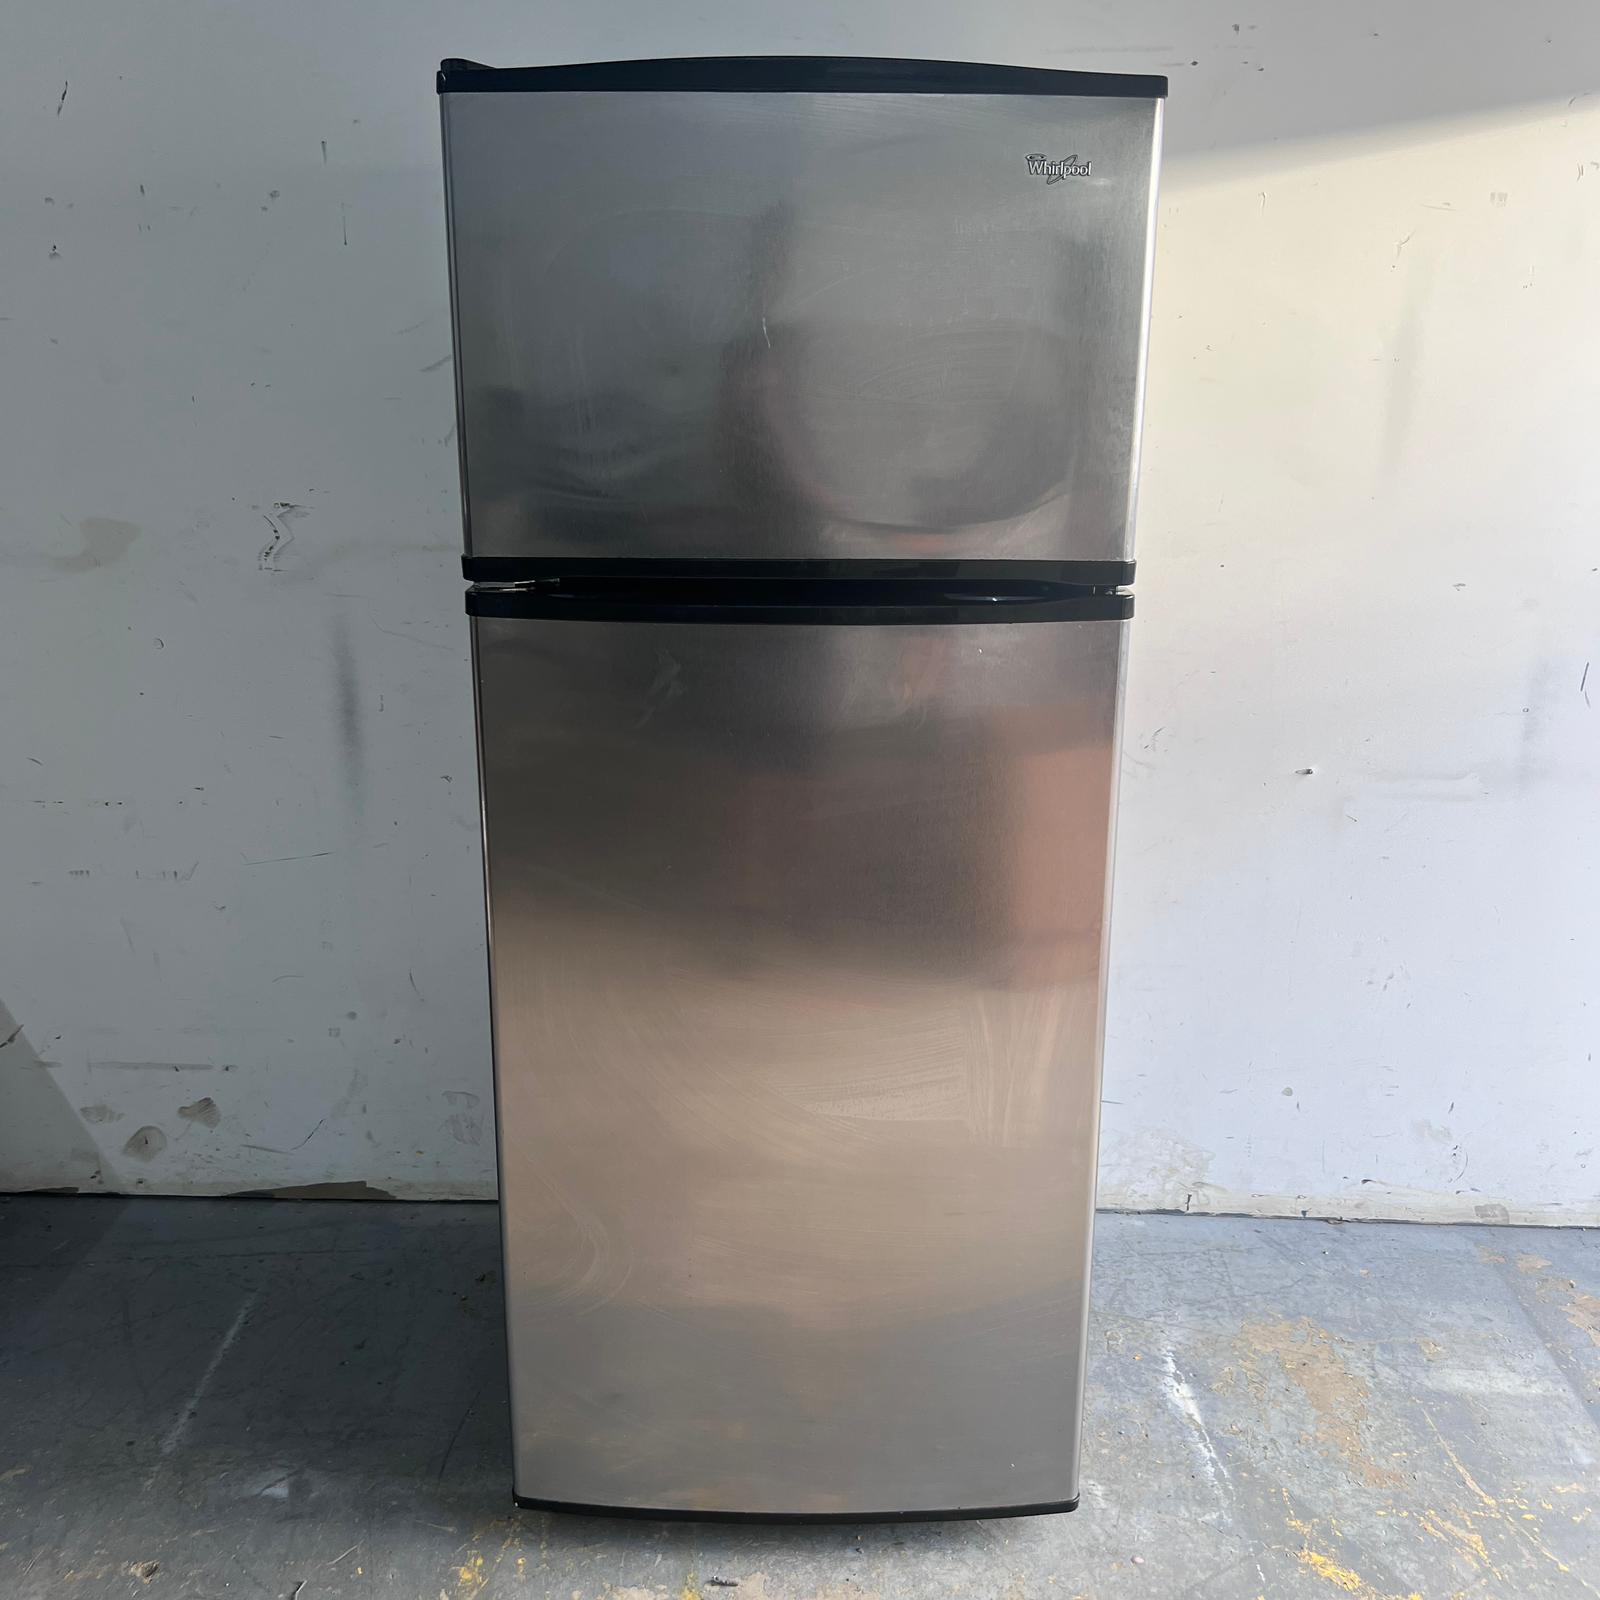 Whirlpool-Stainless-Steel-Top-and-Bottom-Refrigerator